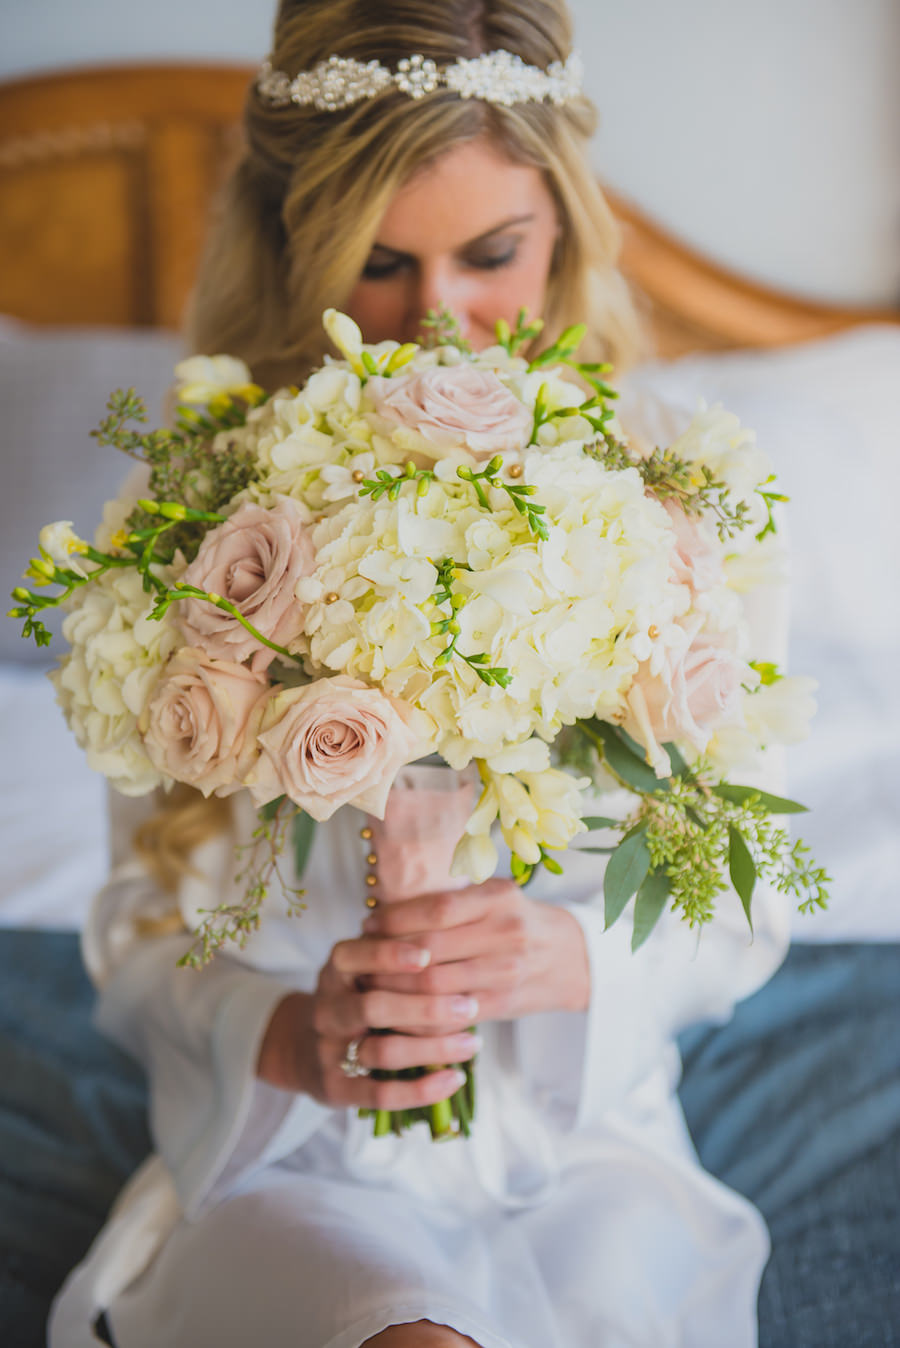 Bridal Getting Ready Wedding Portrait with Ivory Hydrangeas and Blush Pink Roses with Greenery Wedding Bouquet with Pink Satin Ribbon | Tampa Wedding Photographer Kera Photography